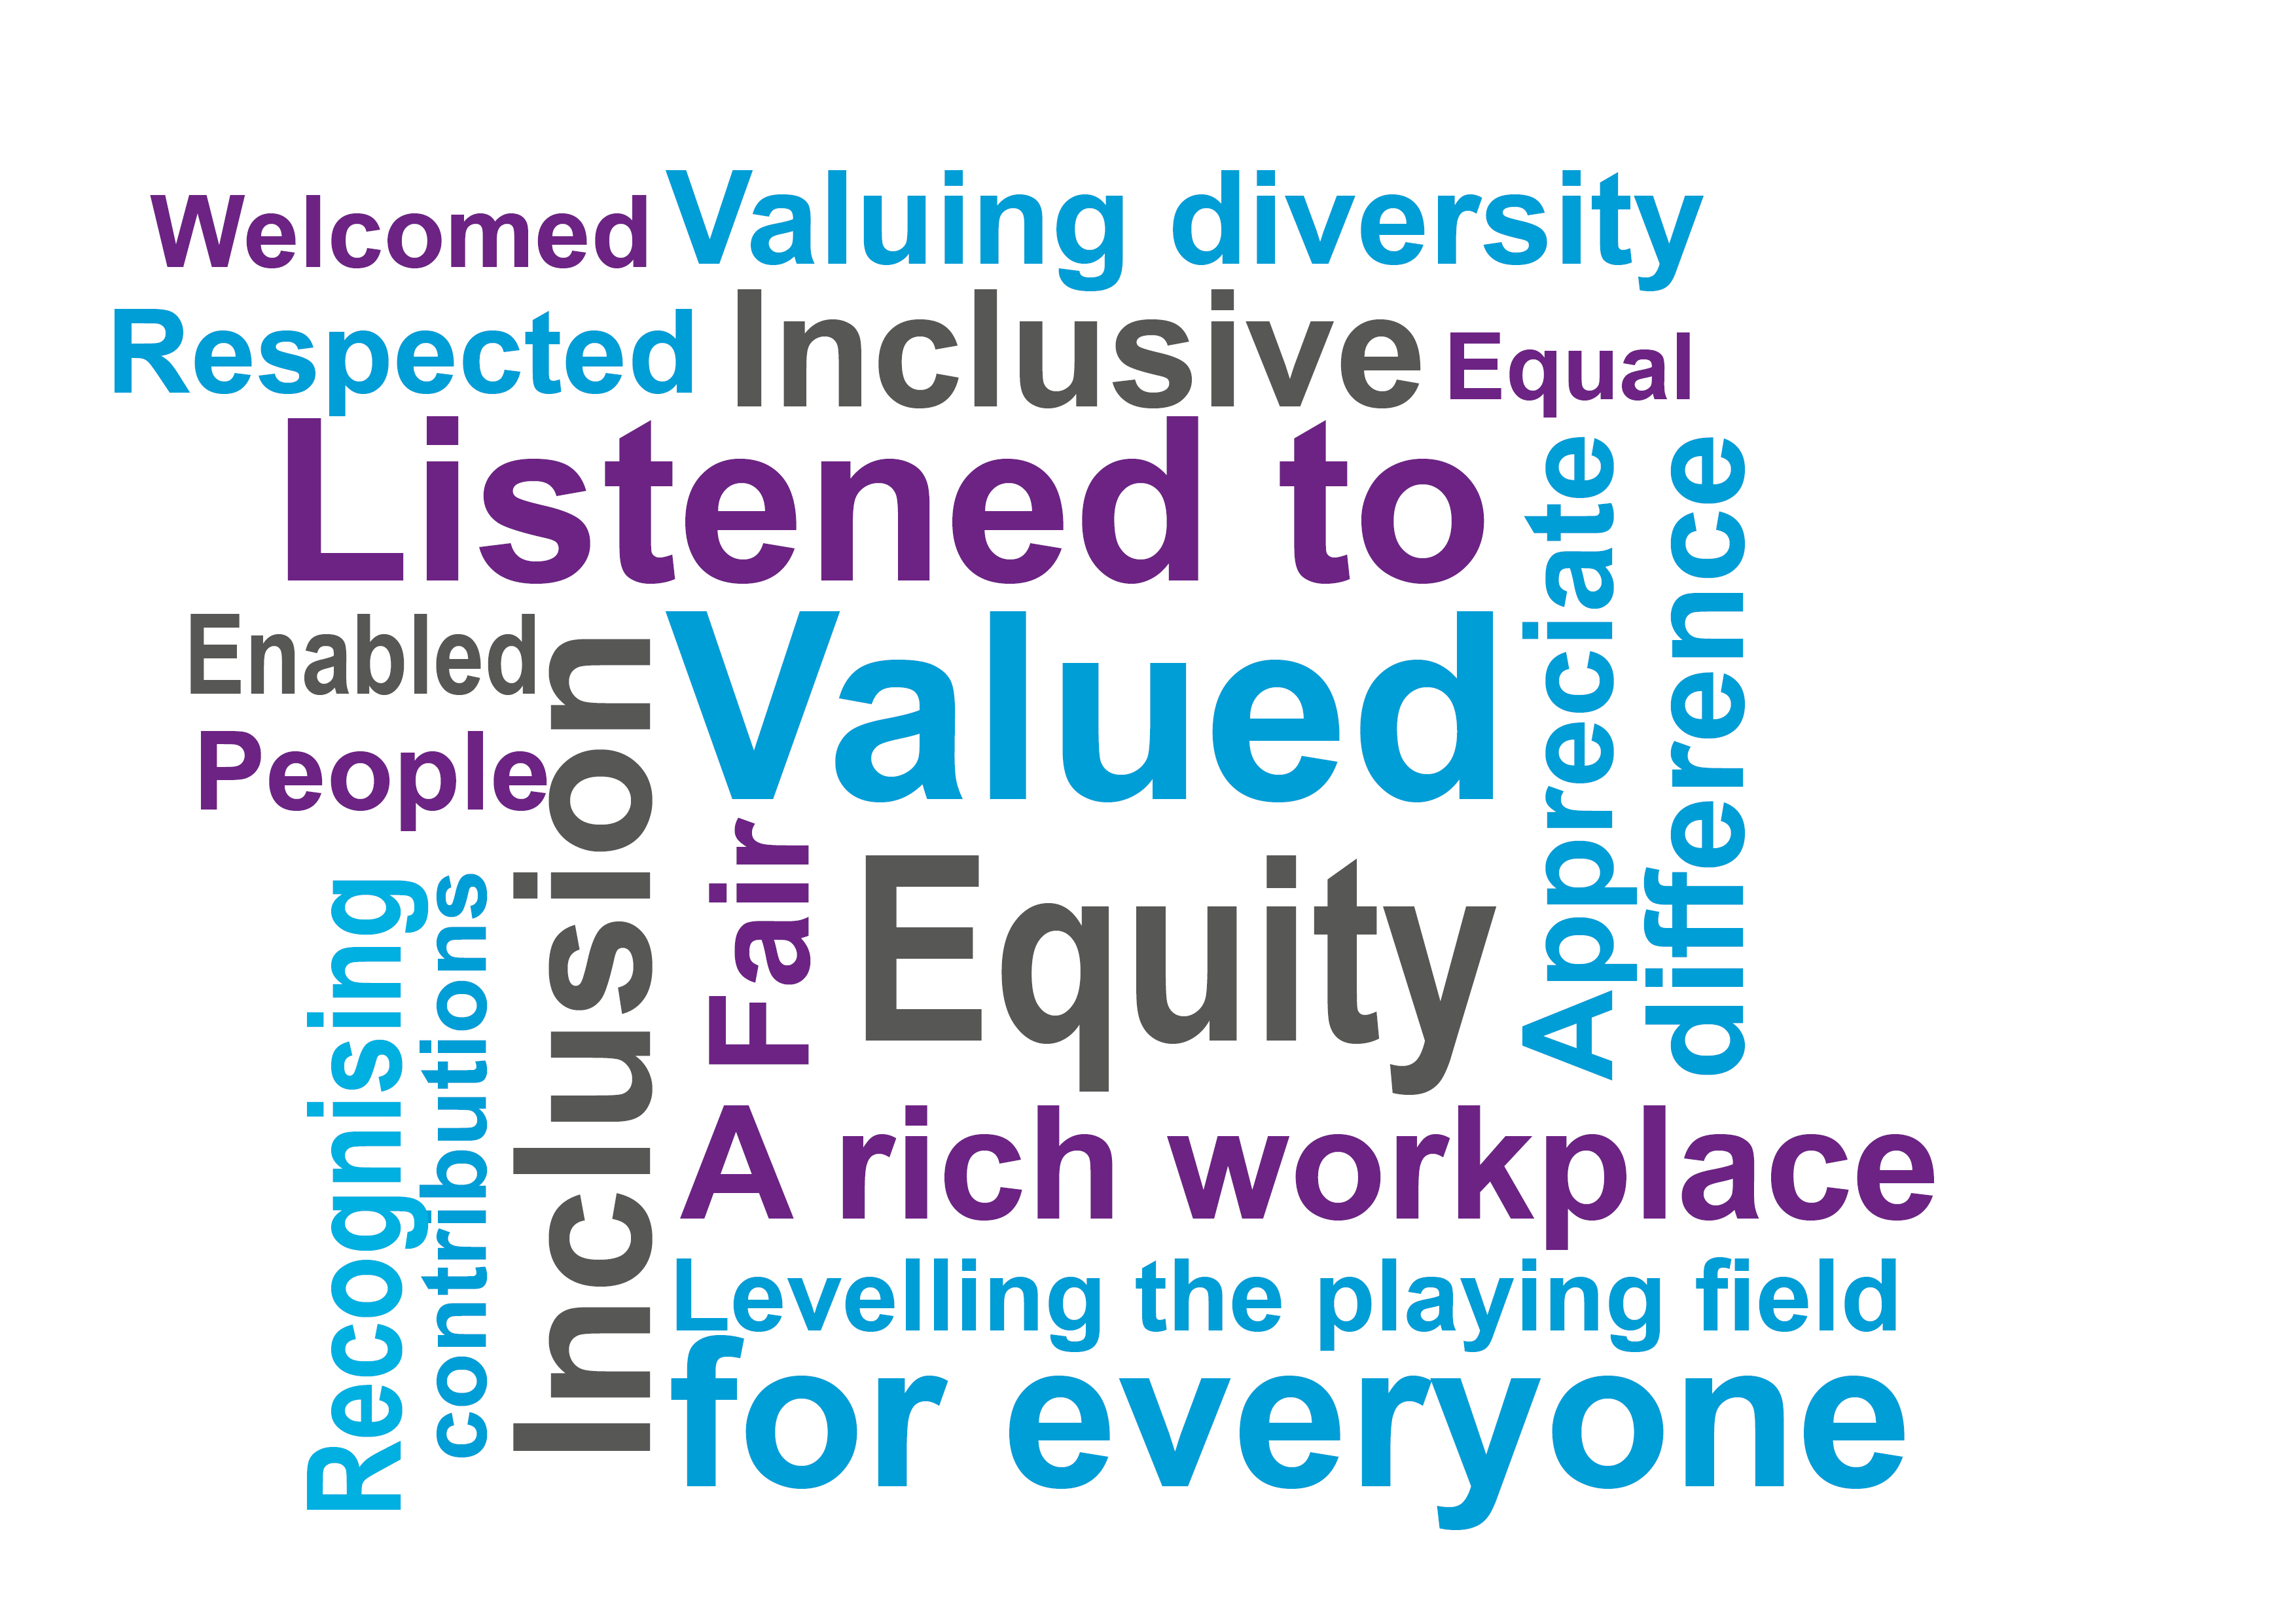 An image of a word cloud showing words associated with an inclusive workplace